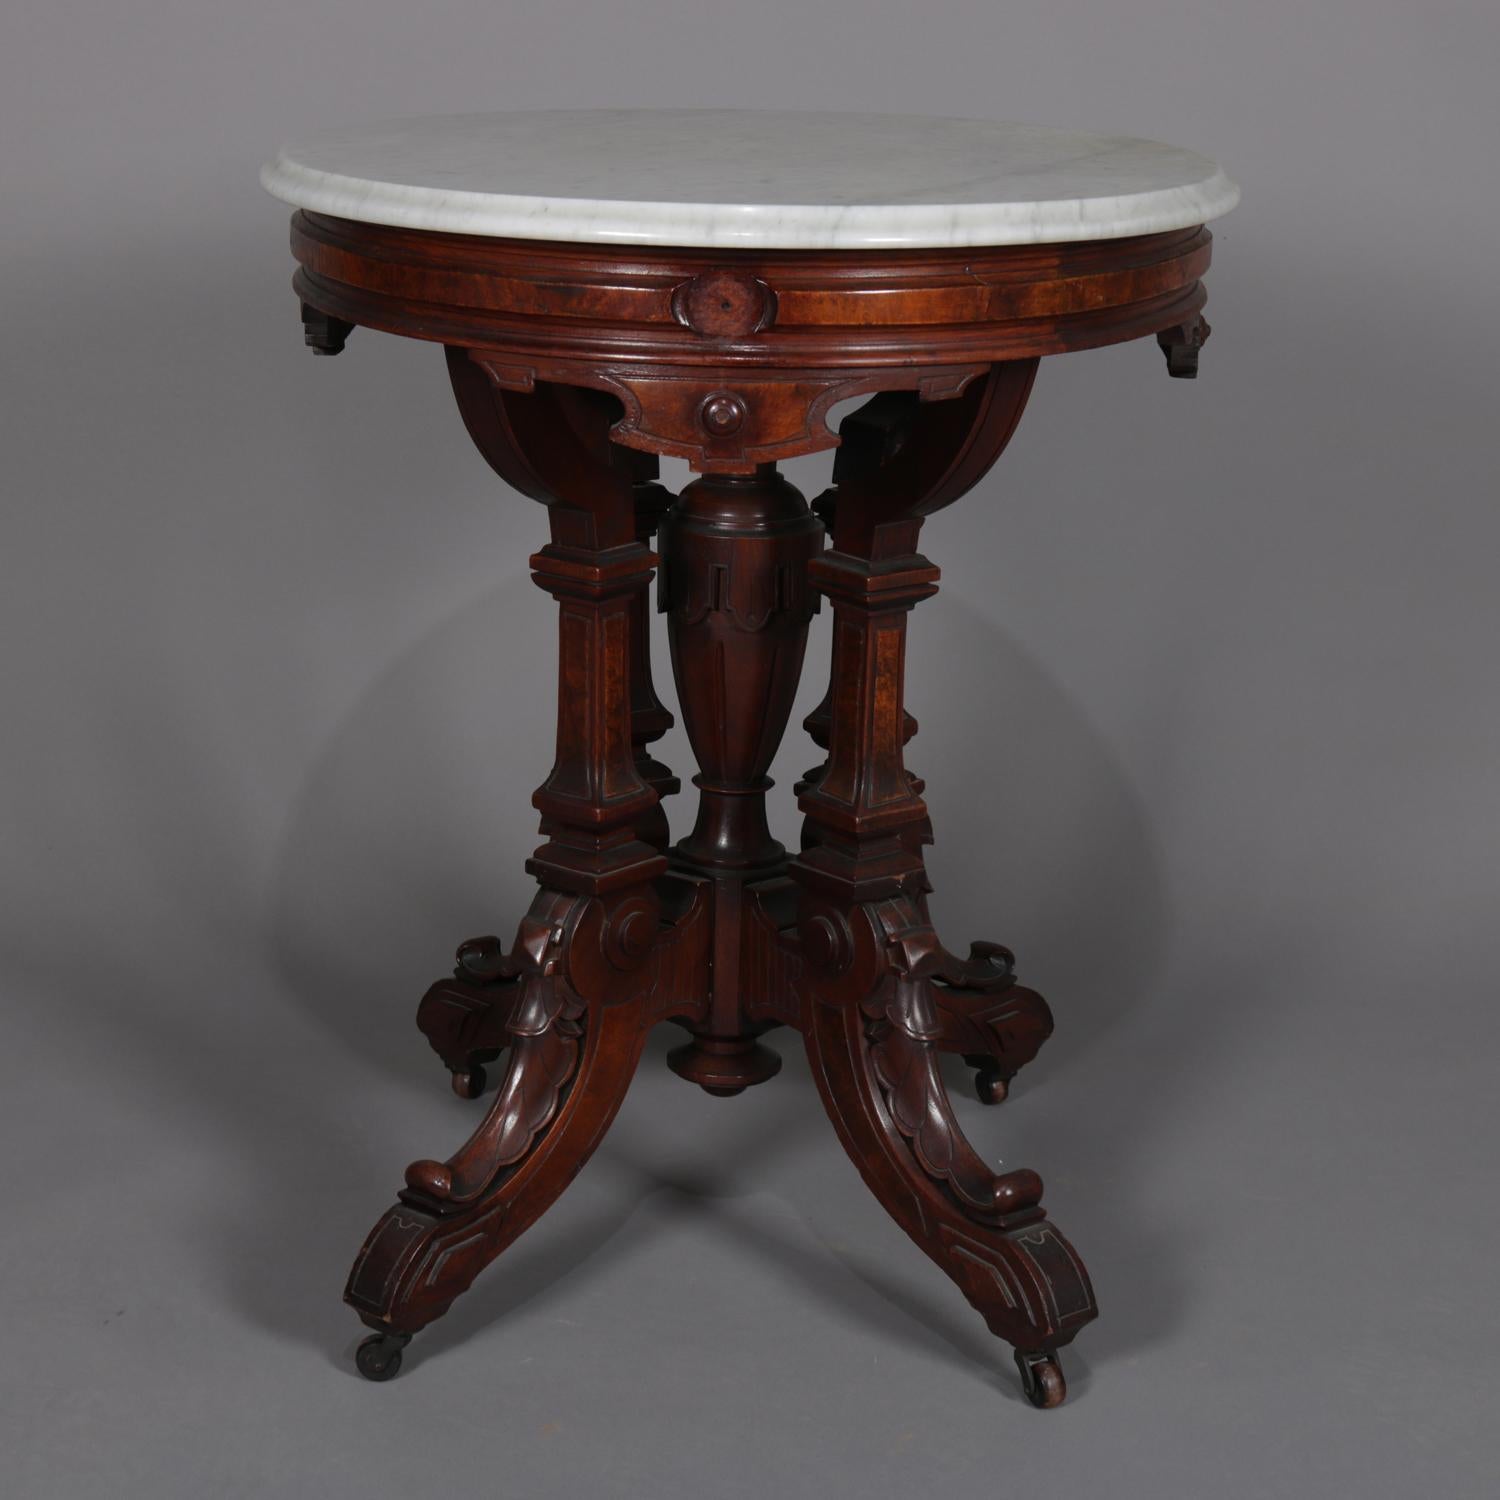 Antique Victorian Eastlake centre table features oval form with bevelled marble-top surmounting carved walnut base having carved apron with burl inset over central urn form pedestal and surround of four foliate carved legs on casters, circa